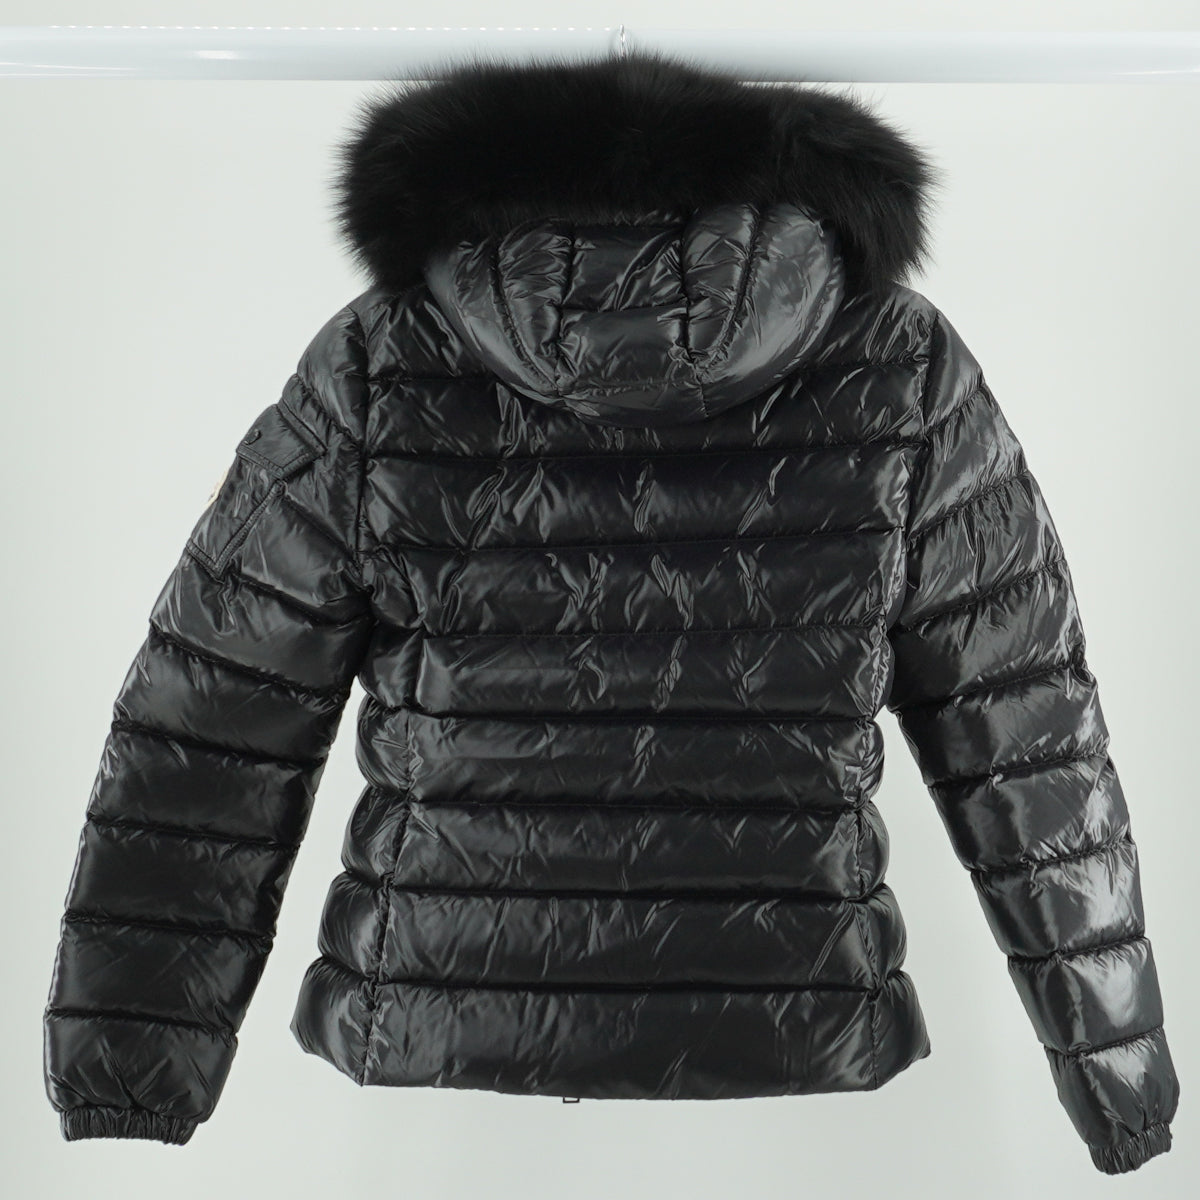 Moncler Child's Down Coat in Black  - Age 10